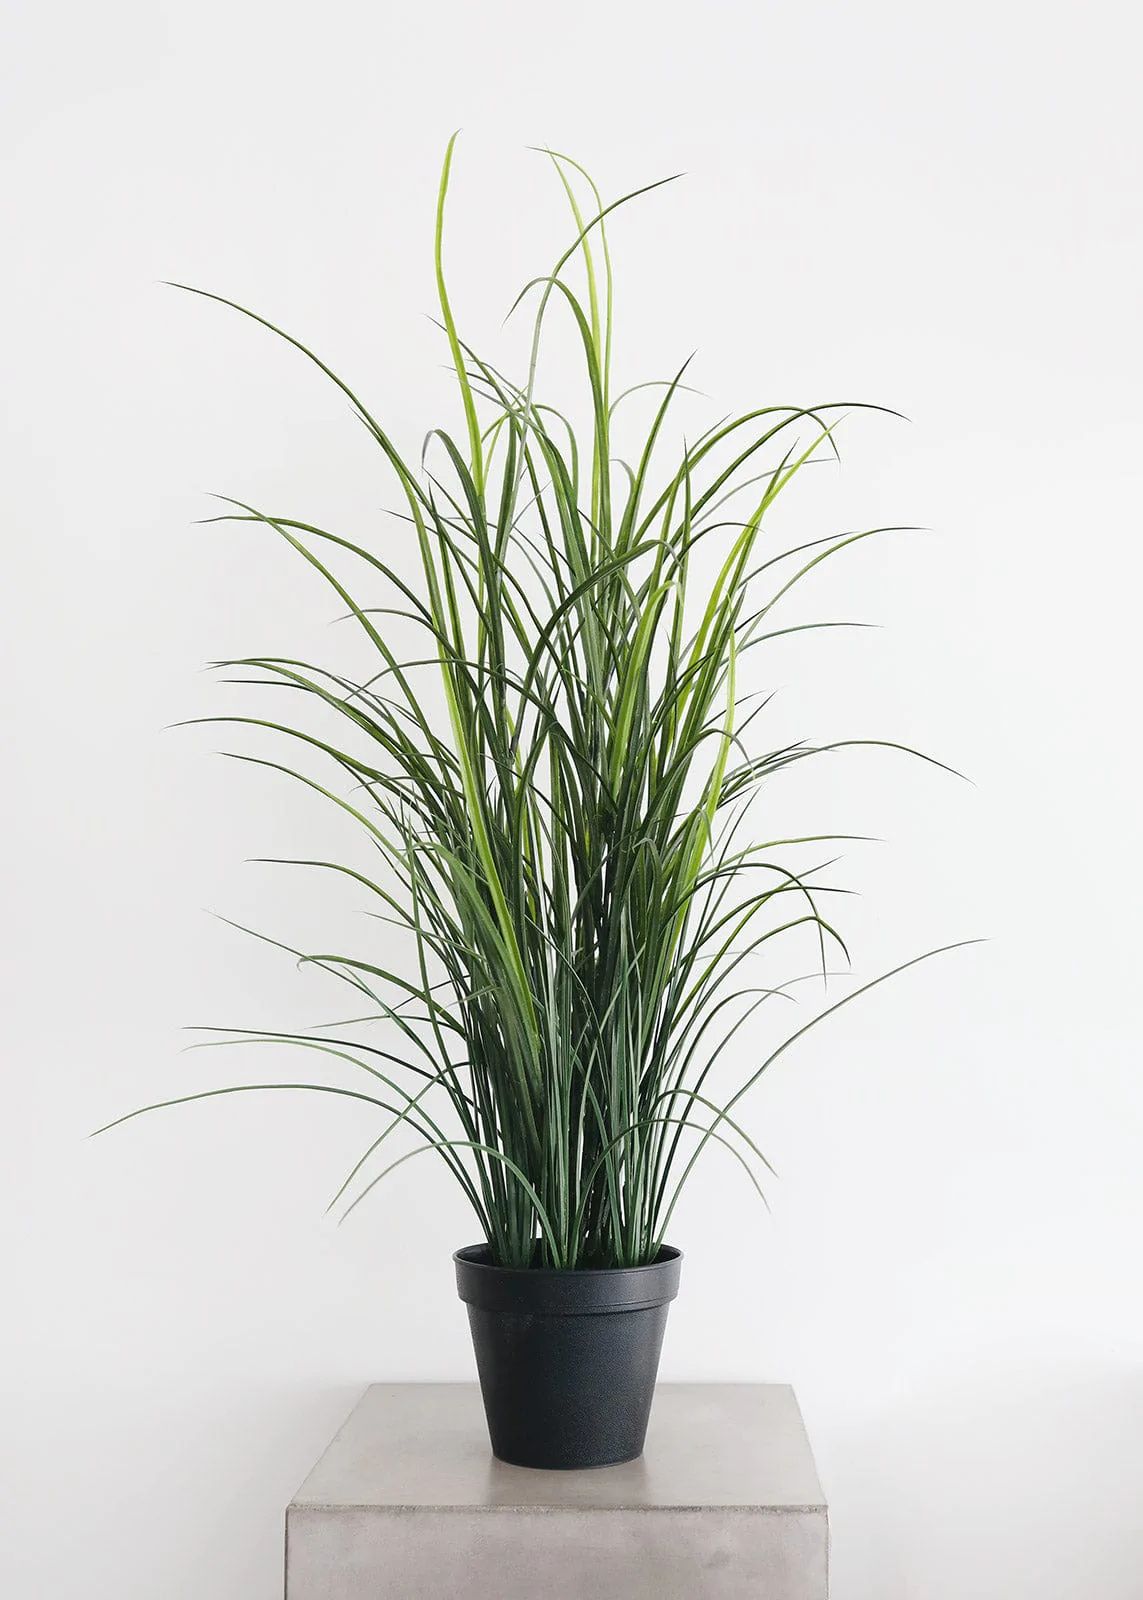 UV Protected Outdoor Potted Grass Plant - 38" | Afloral